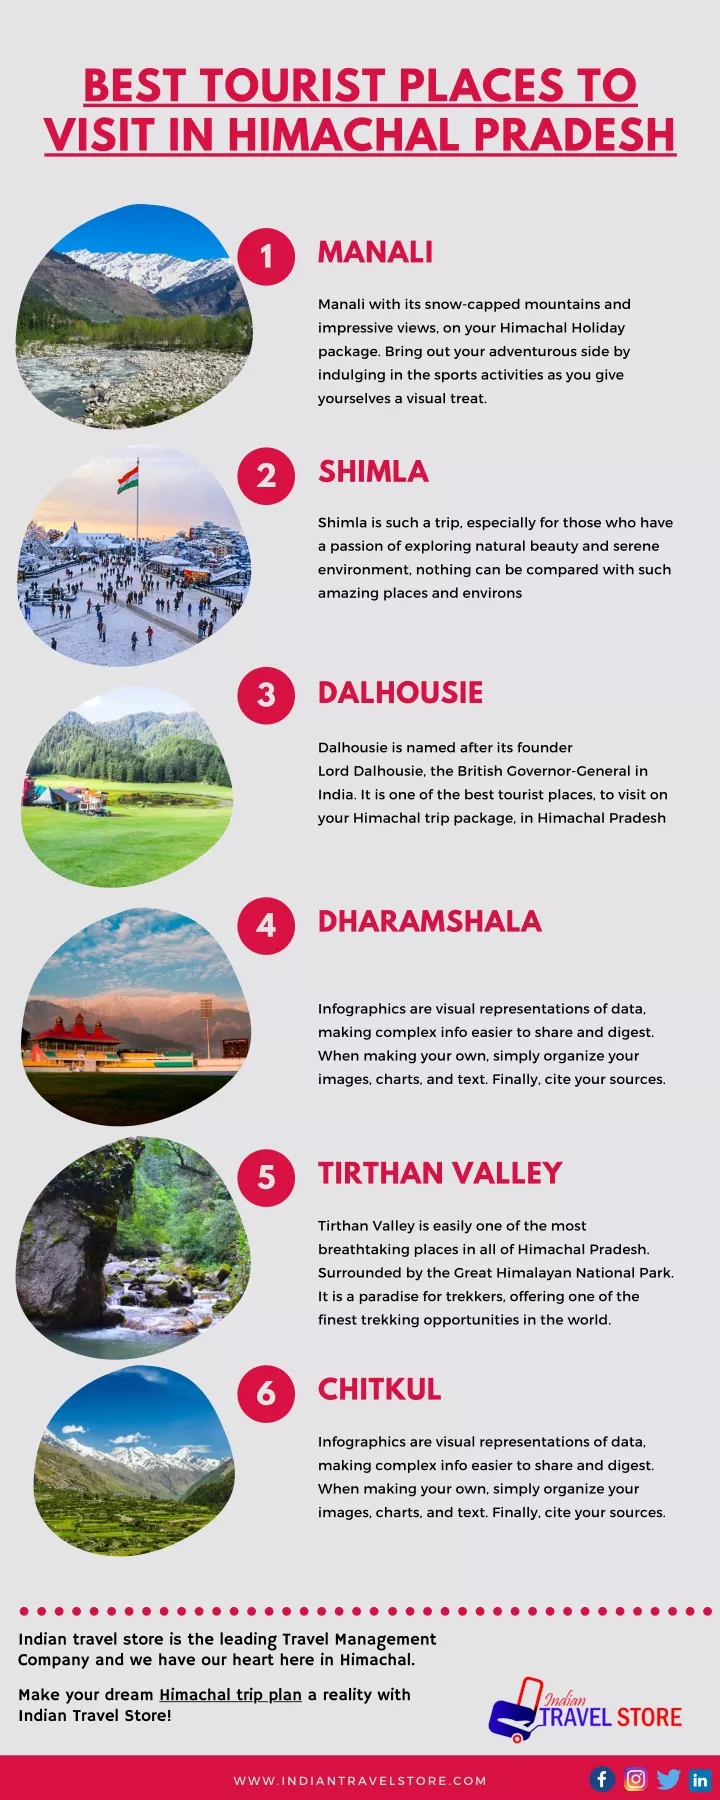 best tourist places to visit in himachal pradesh